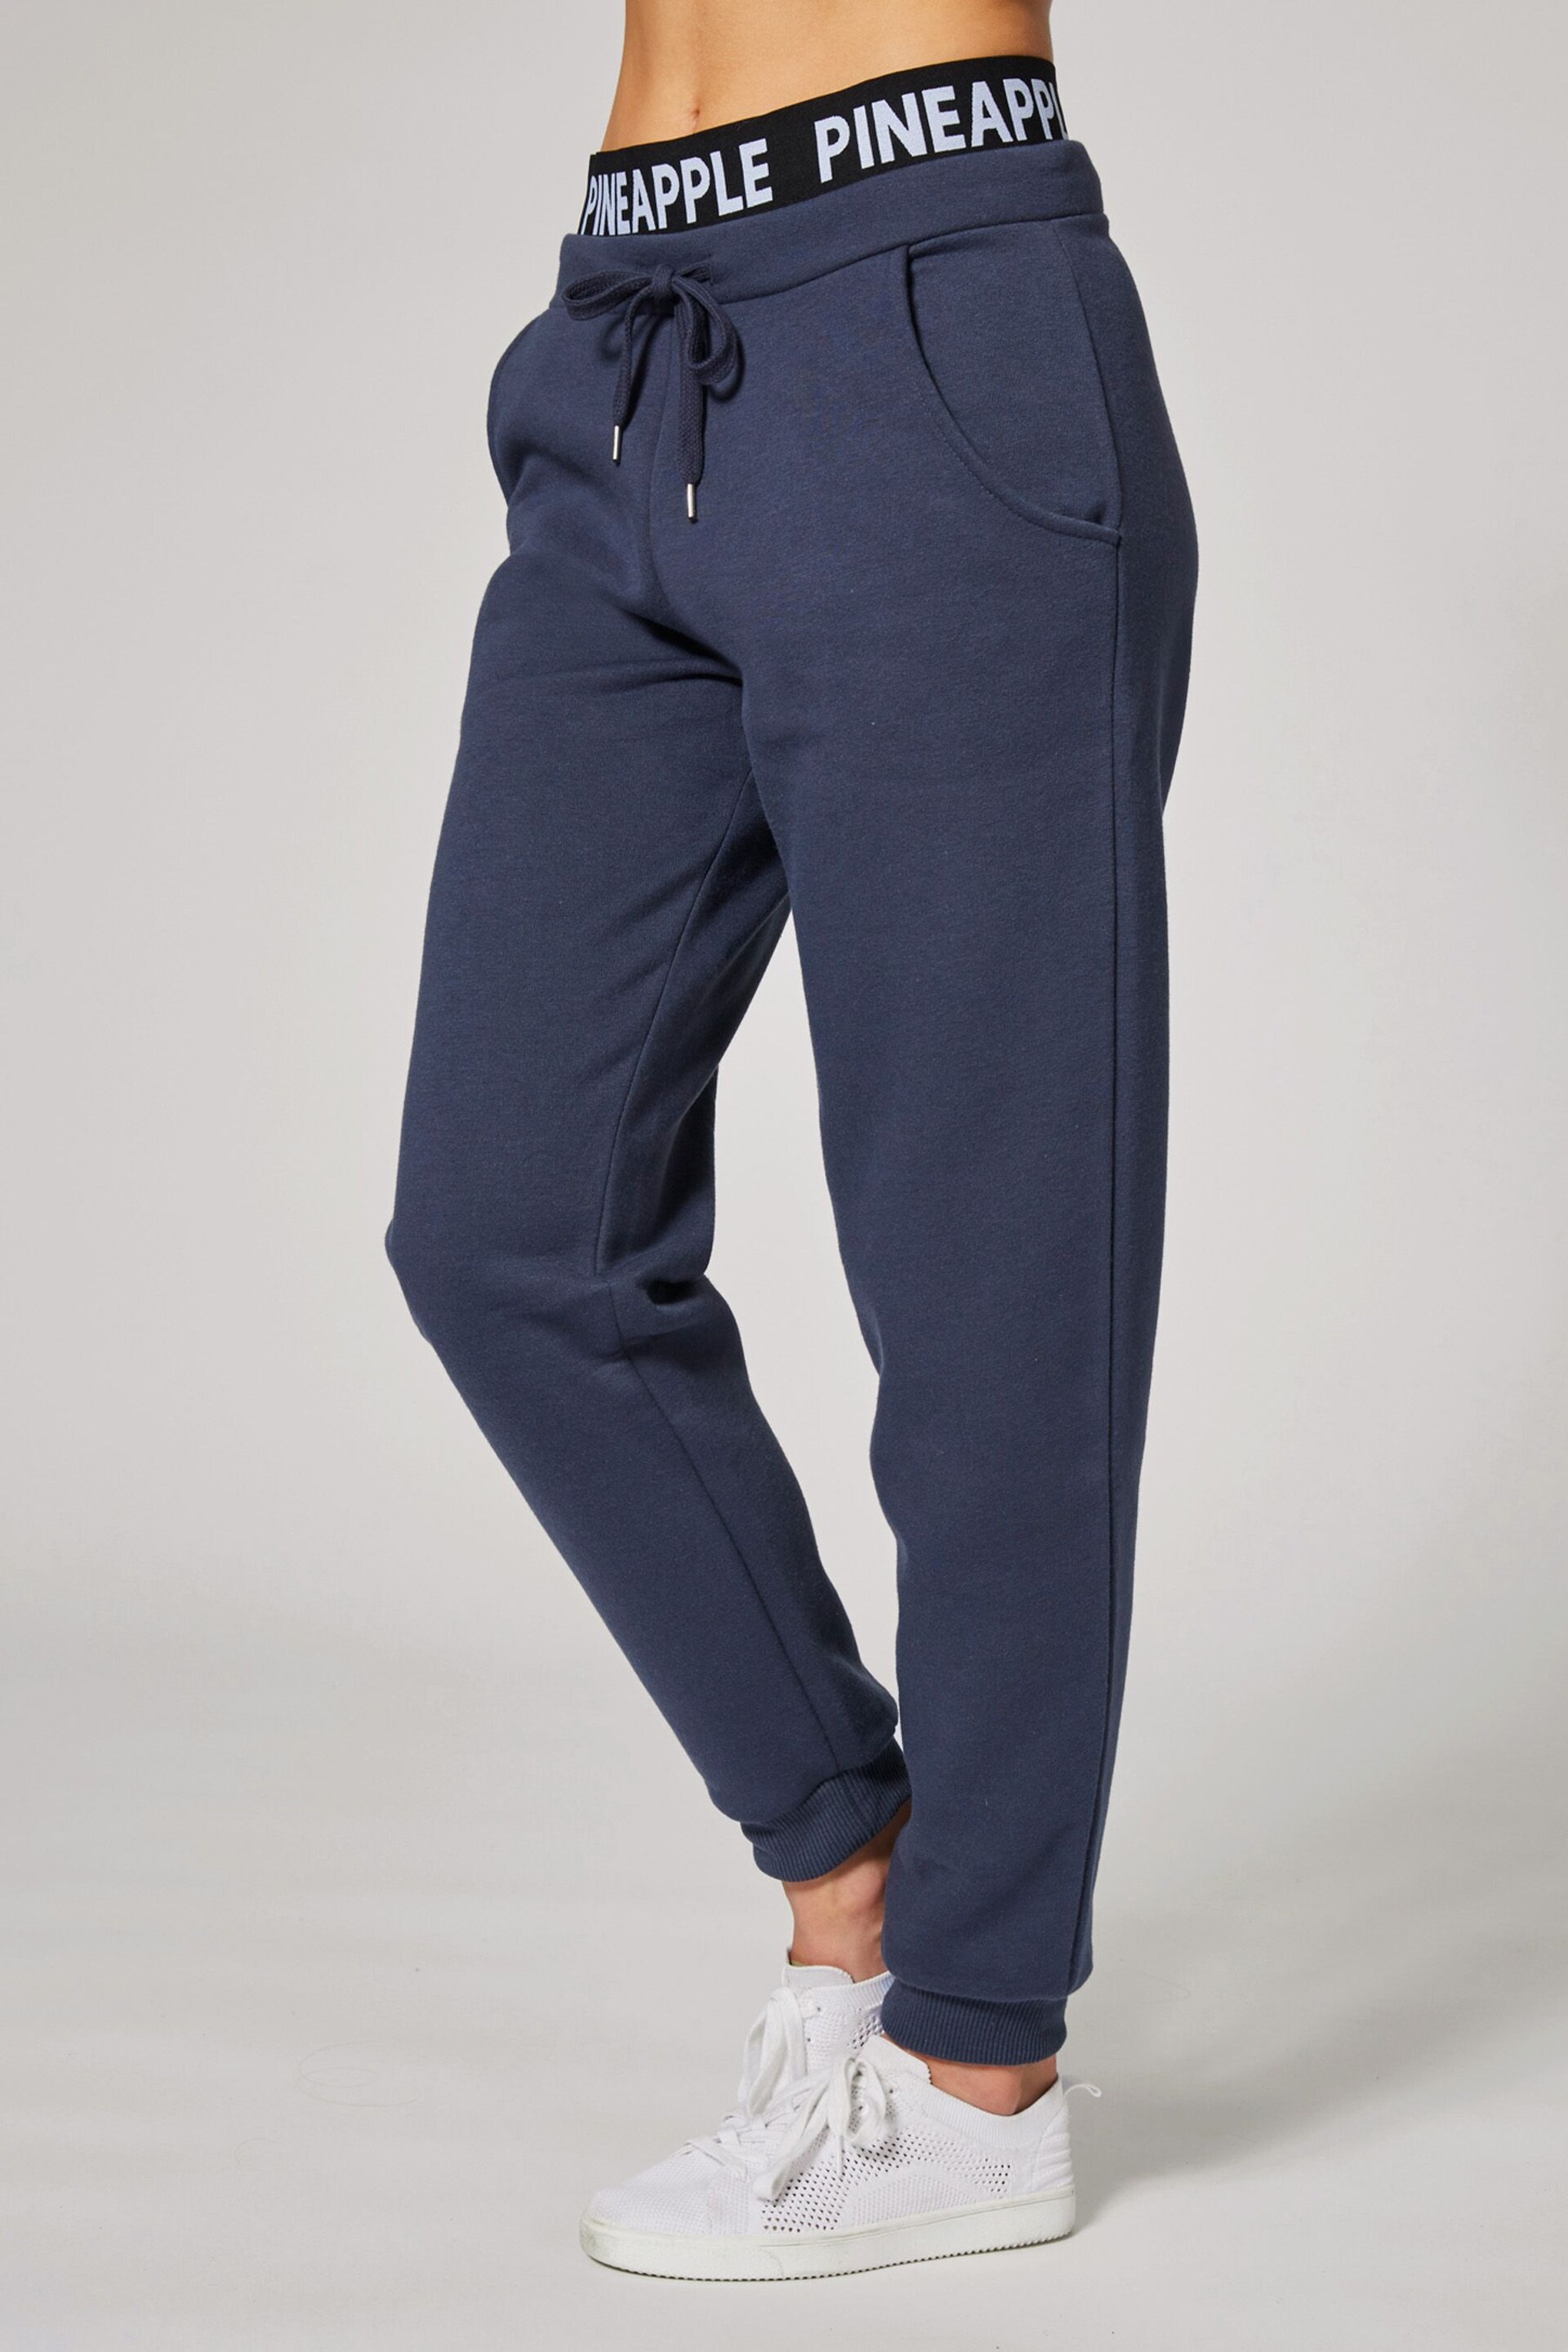 Pineapple Blue Double Waistband Joggers - Image 1 of 5